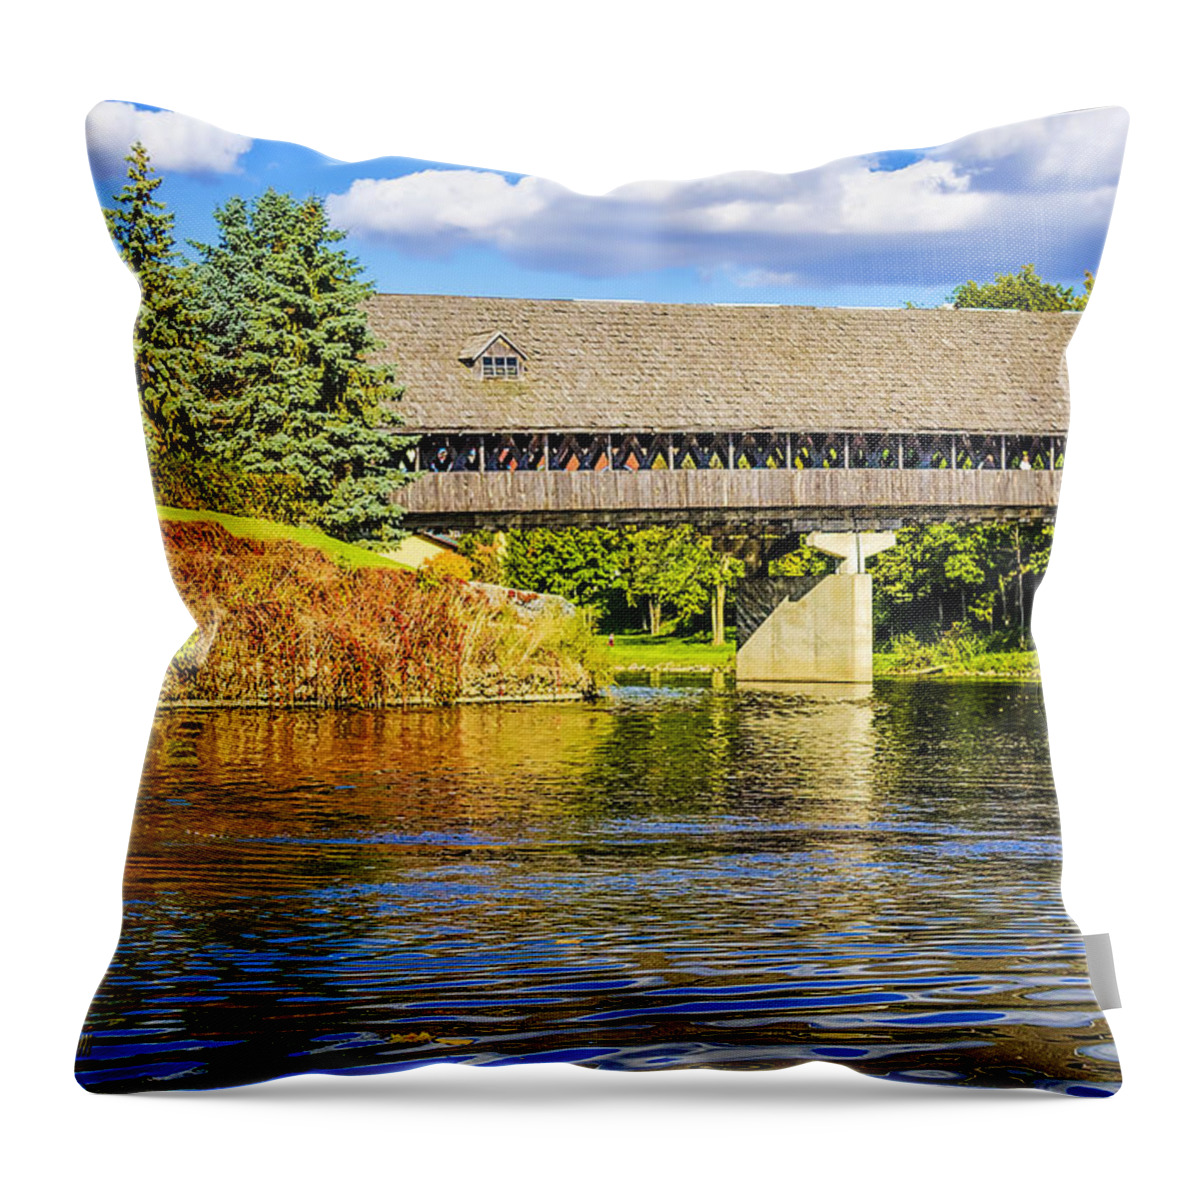 Color Tour Throw Pillow featuring the photograph Frankenmuth Covered Bridge by LeeAnn McLaneGoetz McLaneGoetzStudioLLCcom